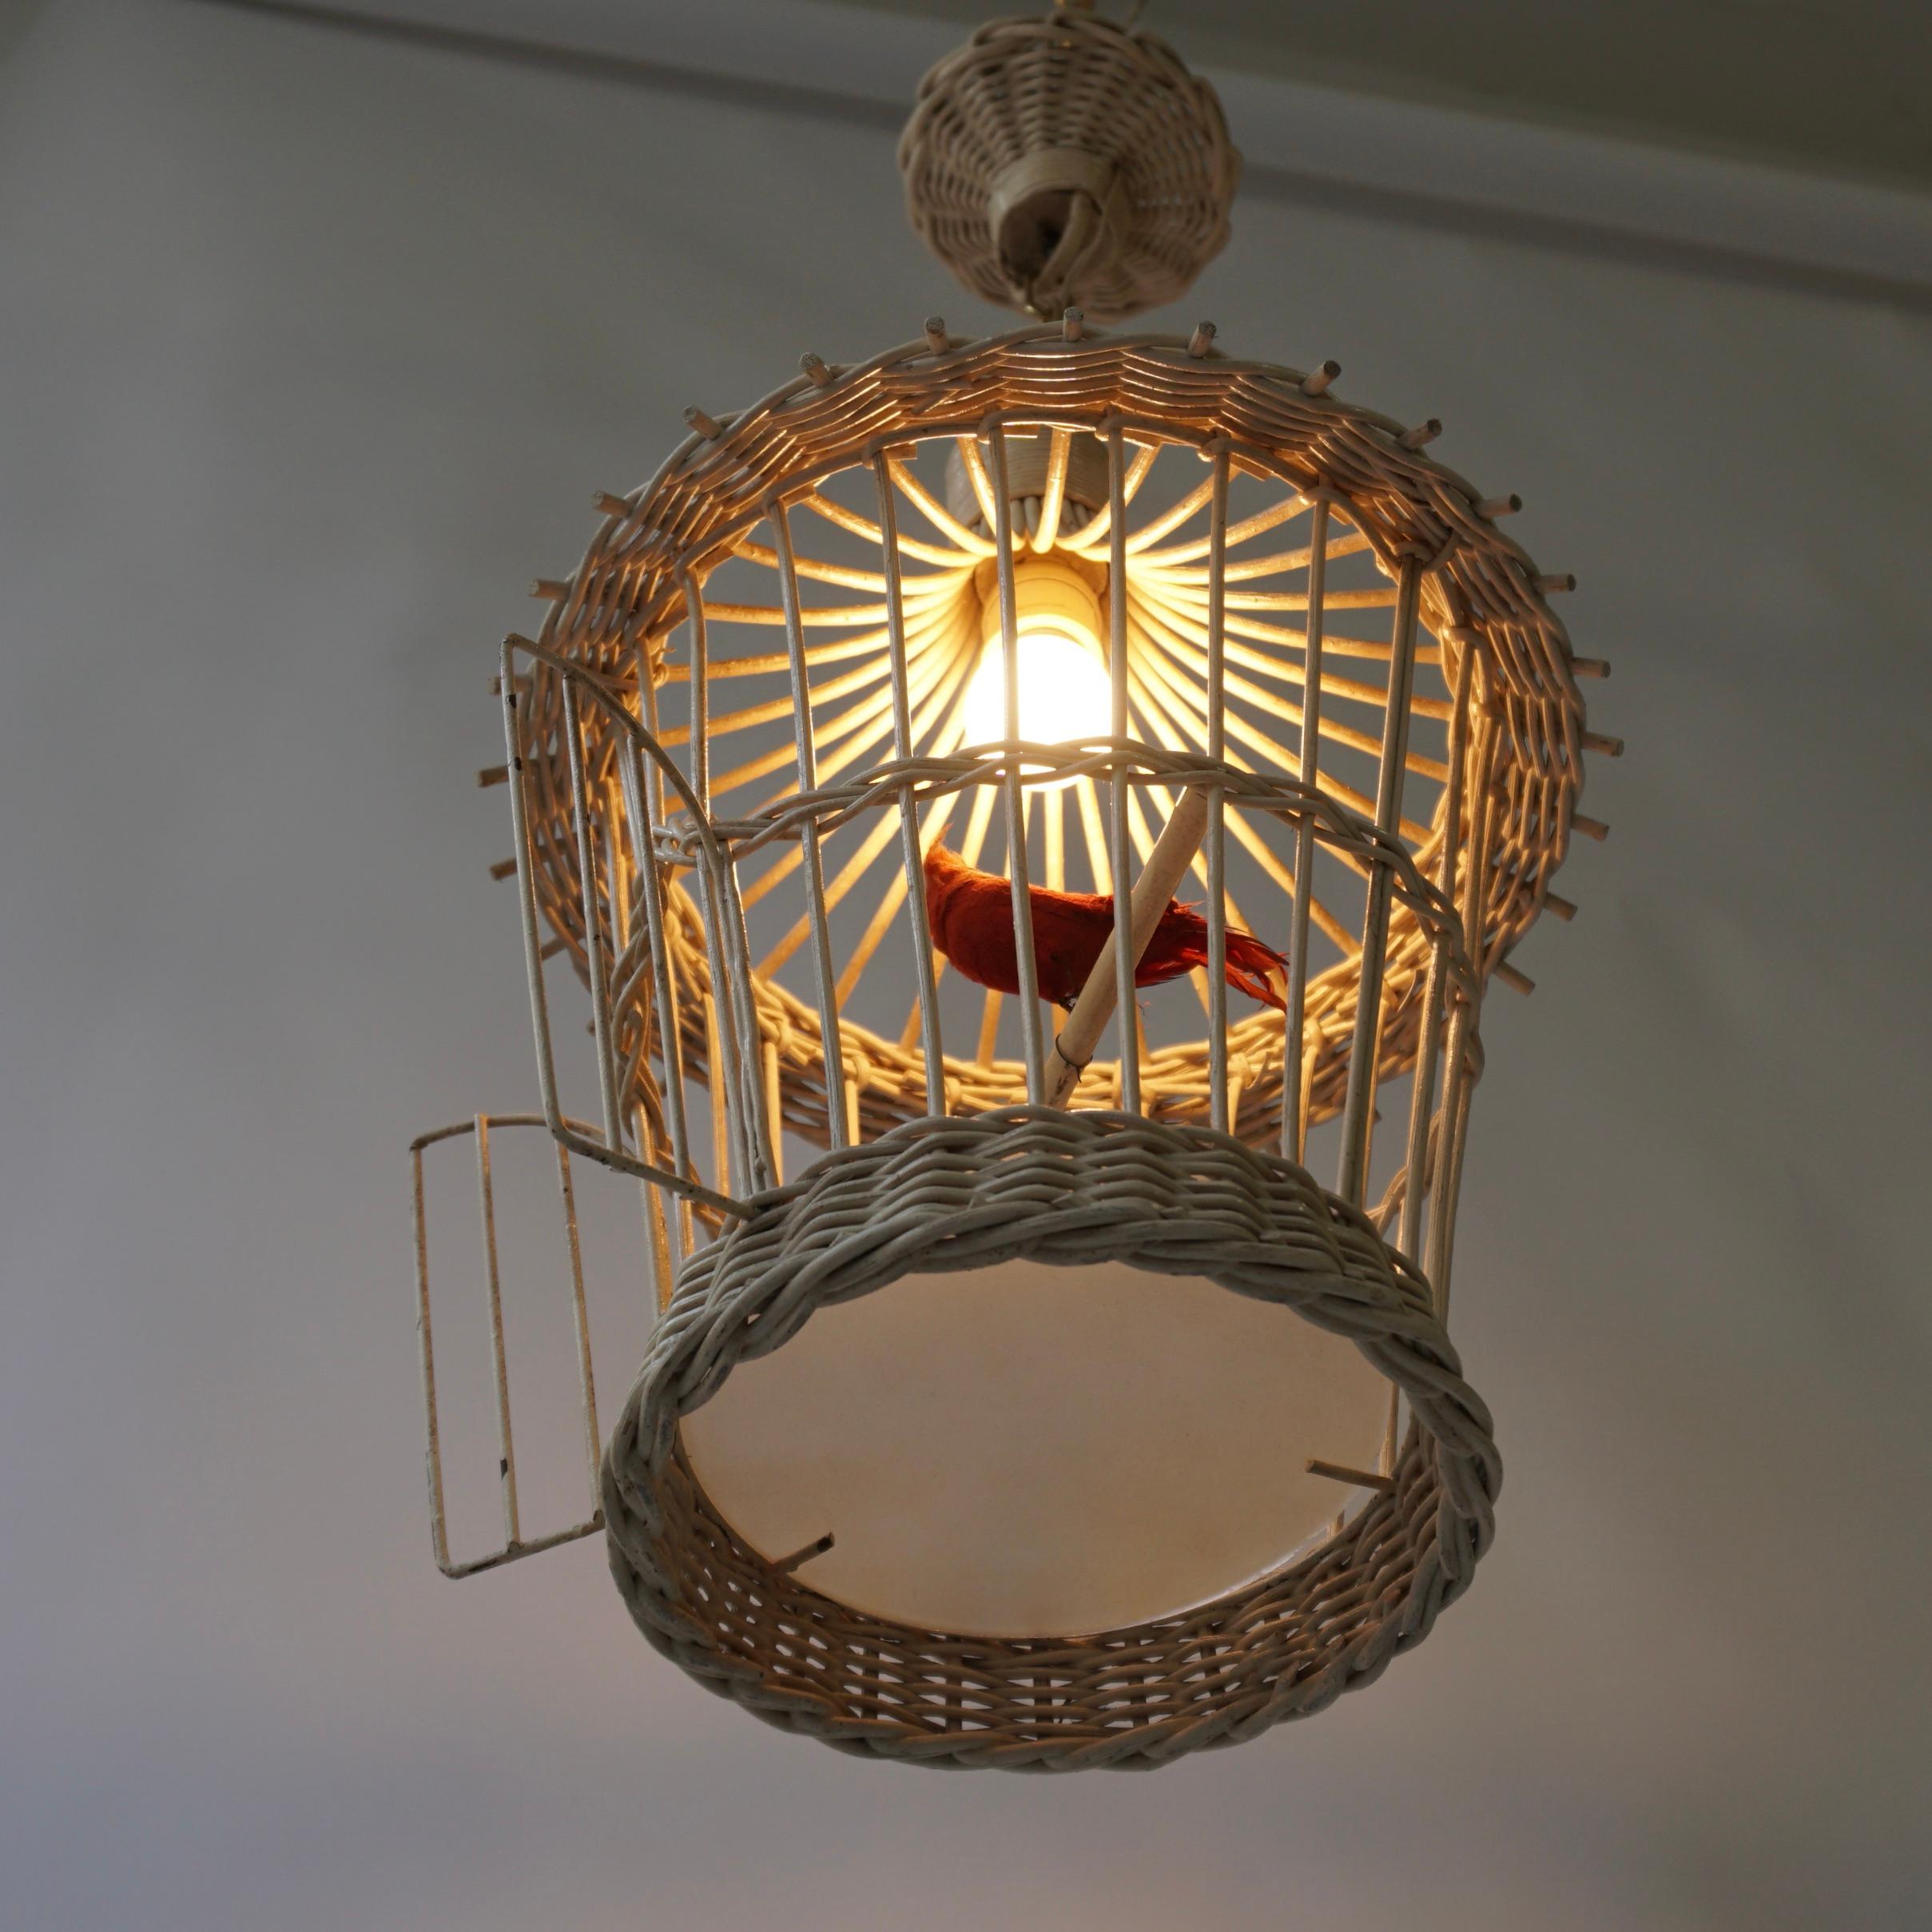 Original Vintage Birdcage Pendant Lamp in White Rattan In Good Condition For Sale In Antwerp, BE